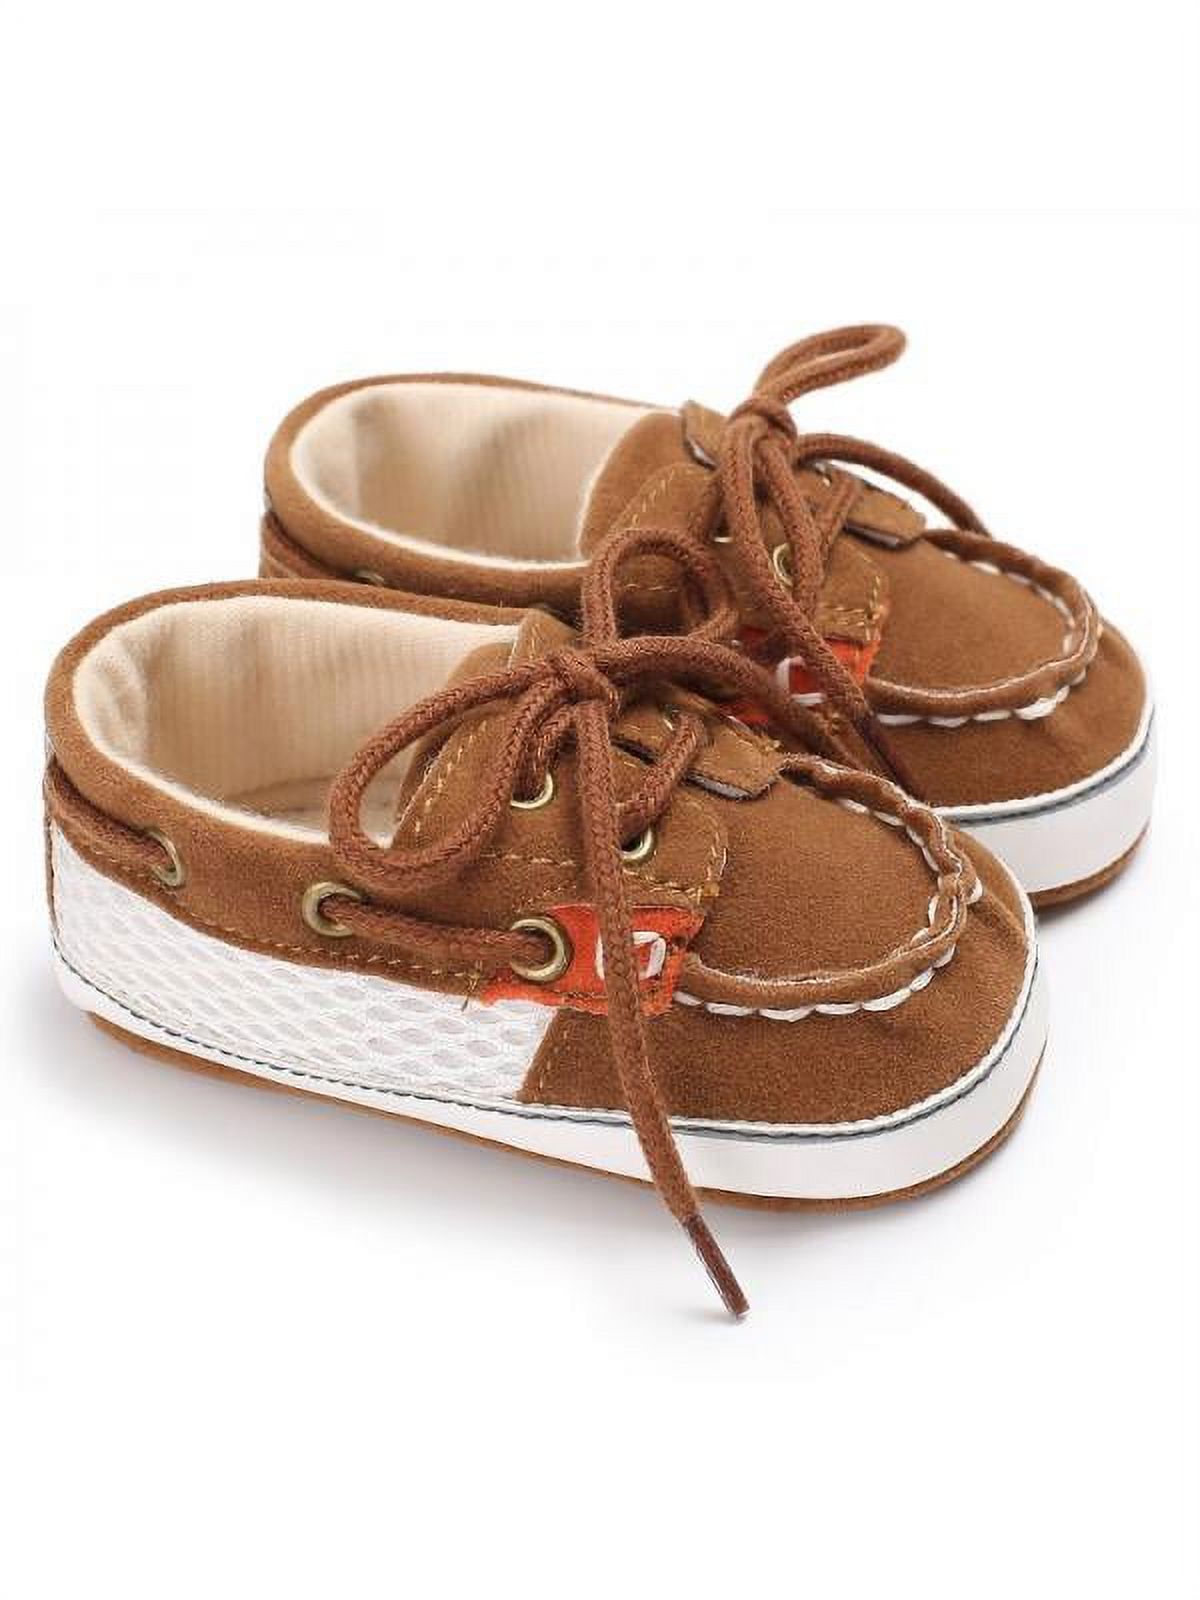 Baby Boy Casual Shoes Toddler Infant Sneaker Soft Sole Crib Shoes - image 5 of 12